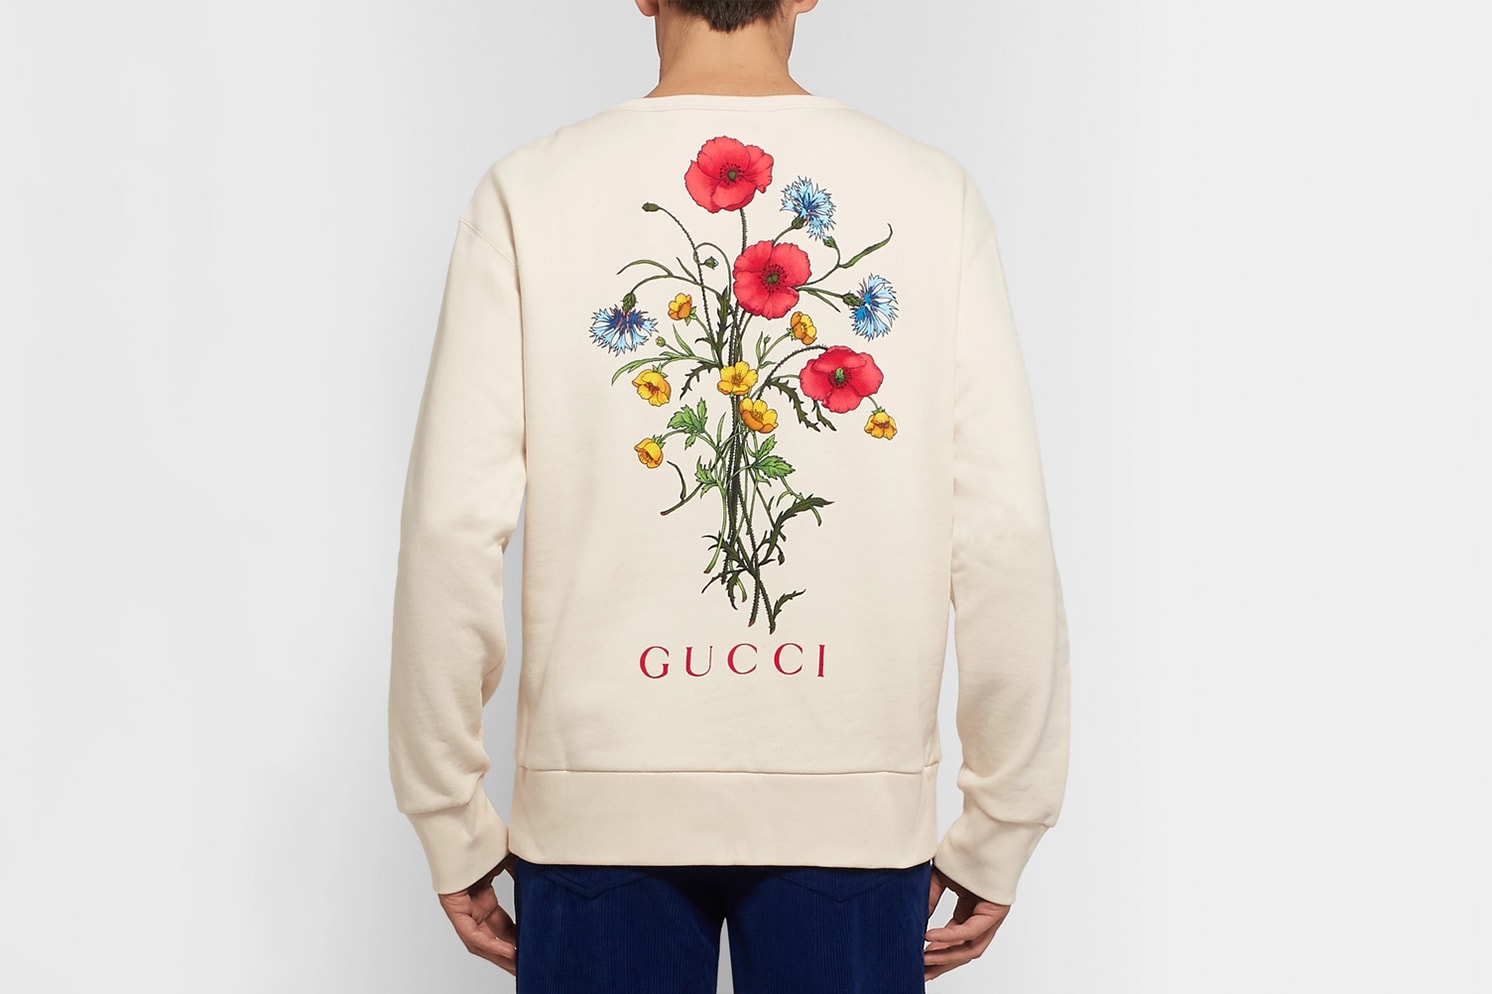 Gucci Chateau Marmont Loopback Sweatshirt printed italy guccy knits tops jumpers winter fashion luxury crewneck made in Italy  